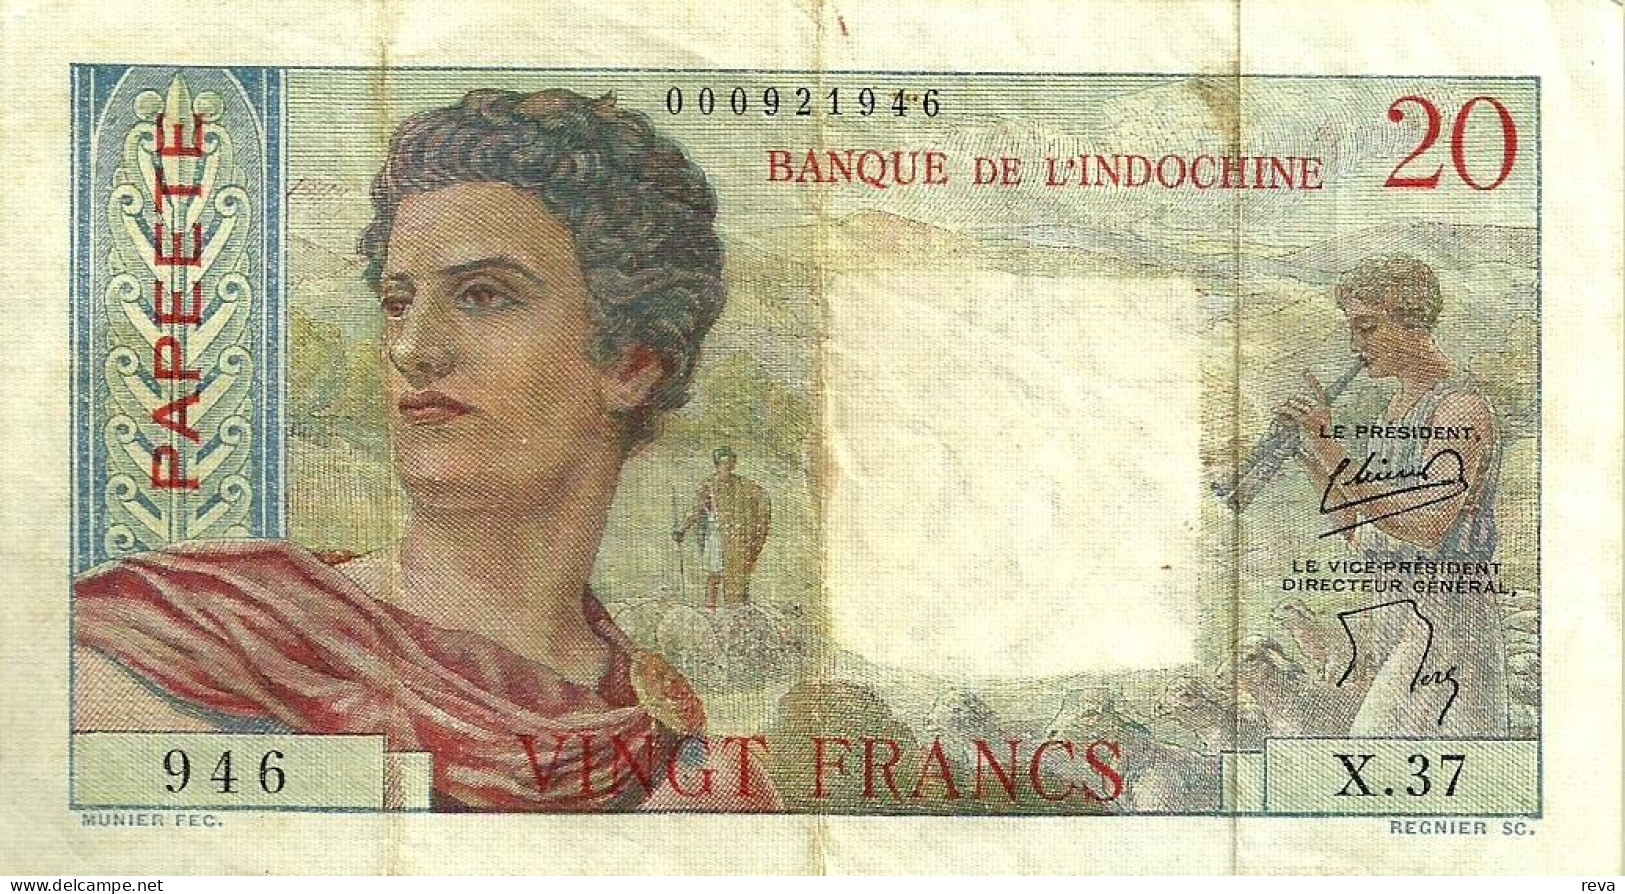 FRENCH POLYNESIA 20 FRANCS GREY MAN HEAD FRONT WOMAN BACK NOT DATED(1963) P21c 3RD SIG VARIETY VF+ READ DESCRIPTION!! - Papeete (Polynésie Française 1914-1985)